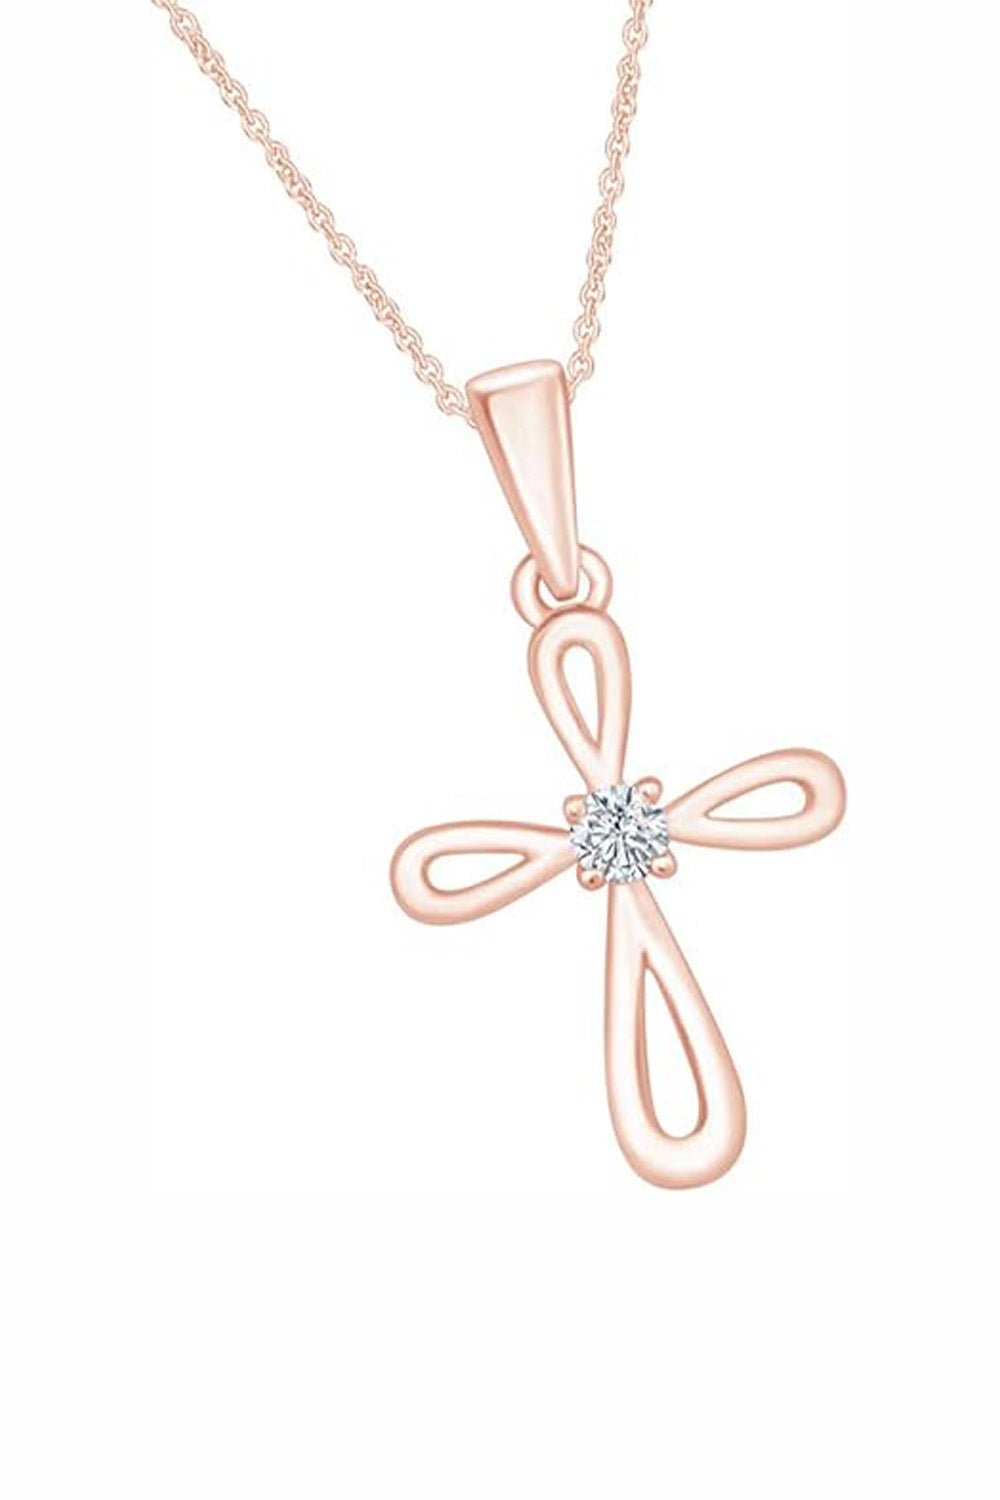 Rose Gold Color Stylish Open Cross Pendant Necklace for Women 